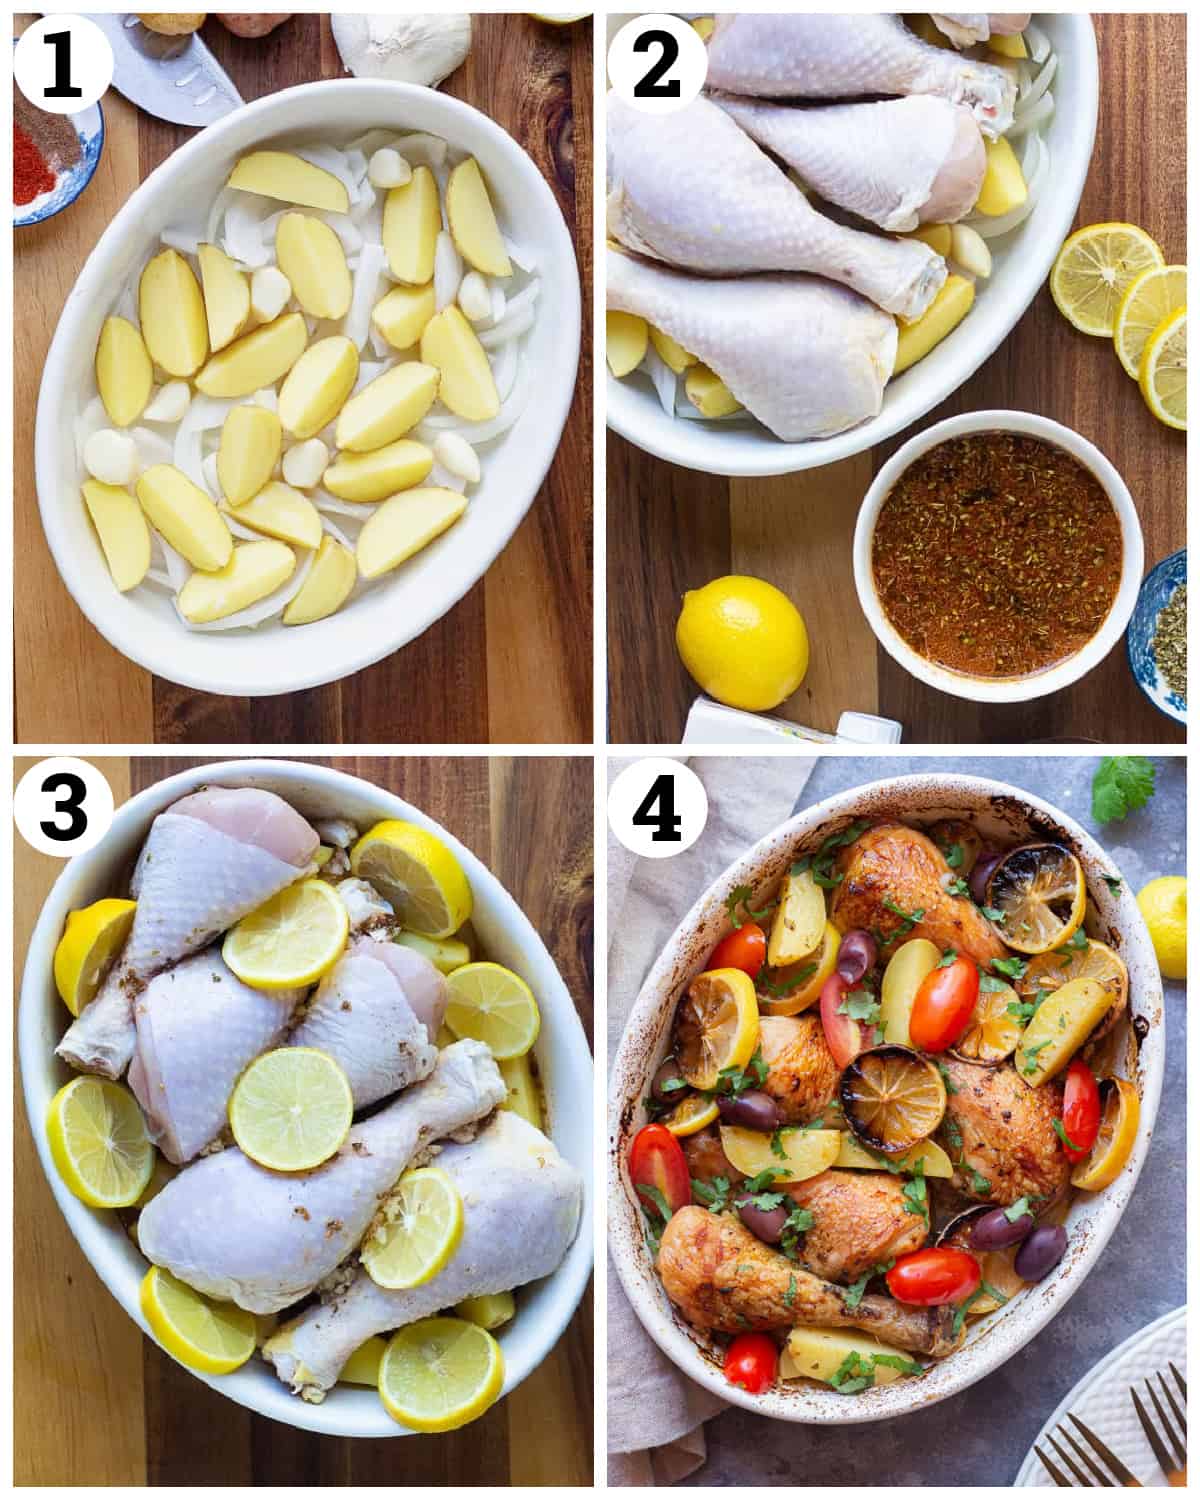 place the potatoes and onions and garlic in a dish then add the chicken and broth and spices. Top with lemon and bake in the oven. 